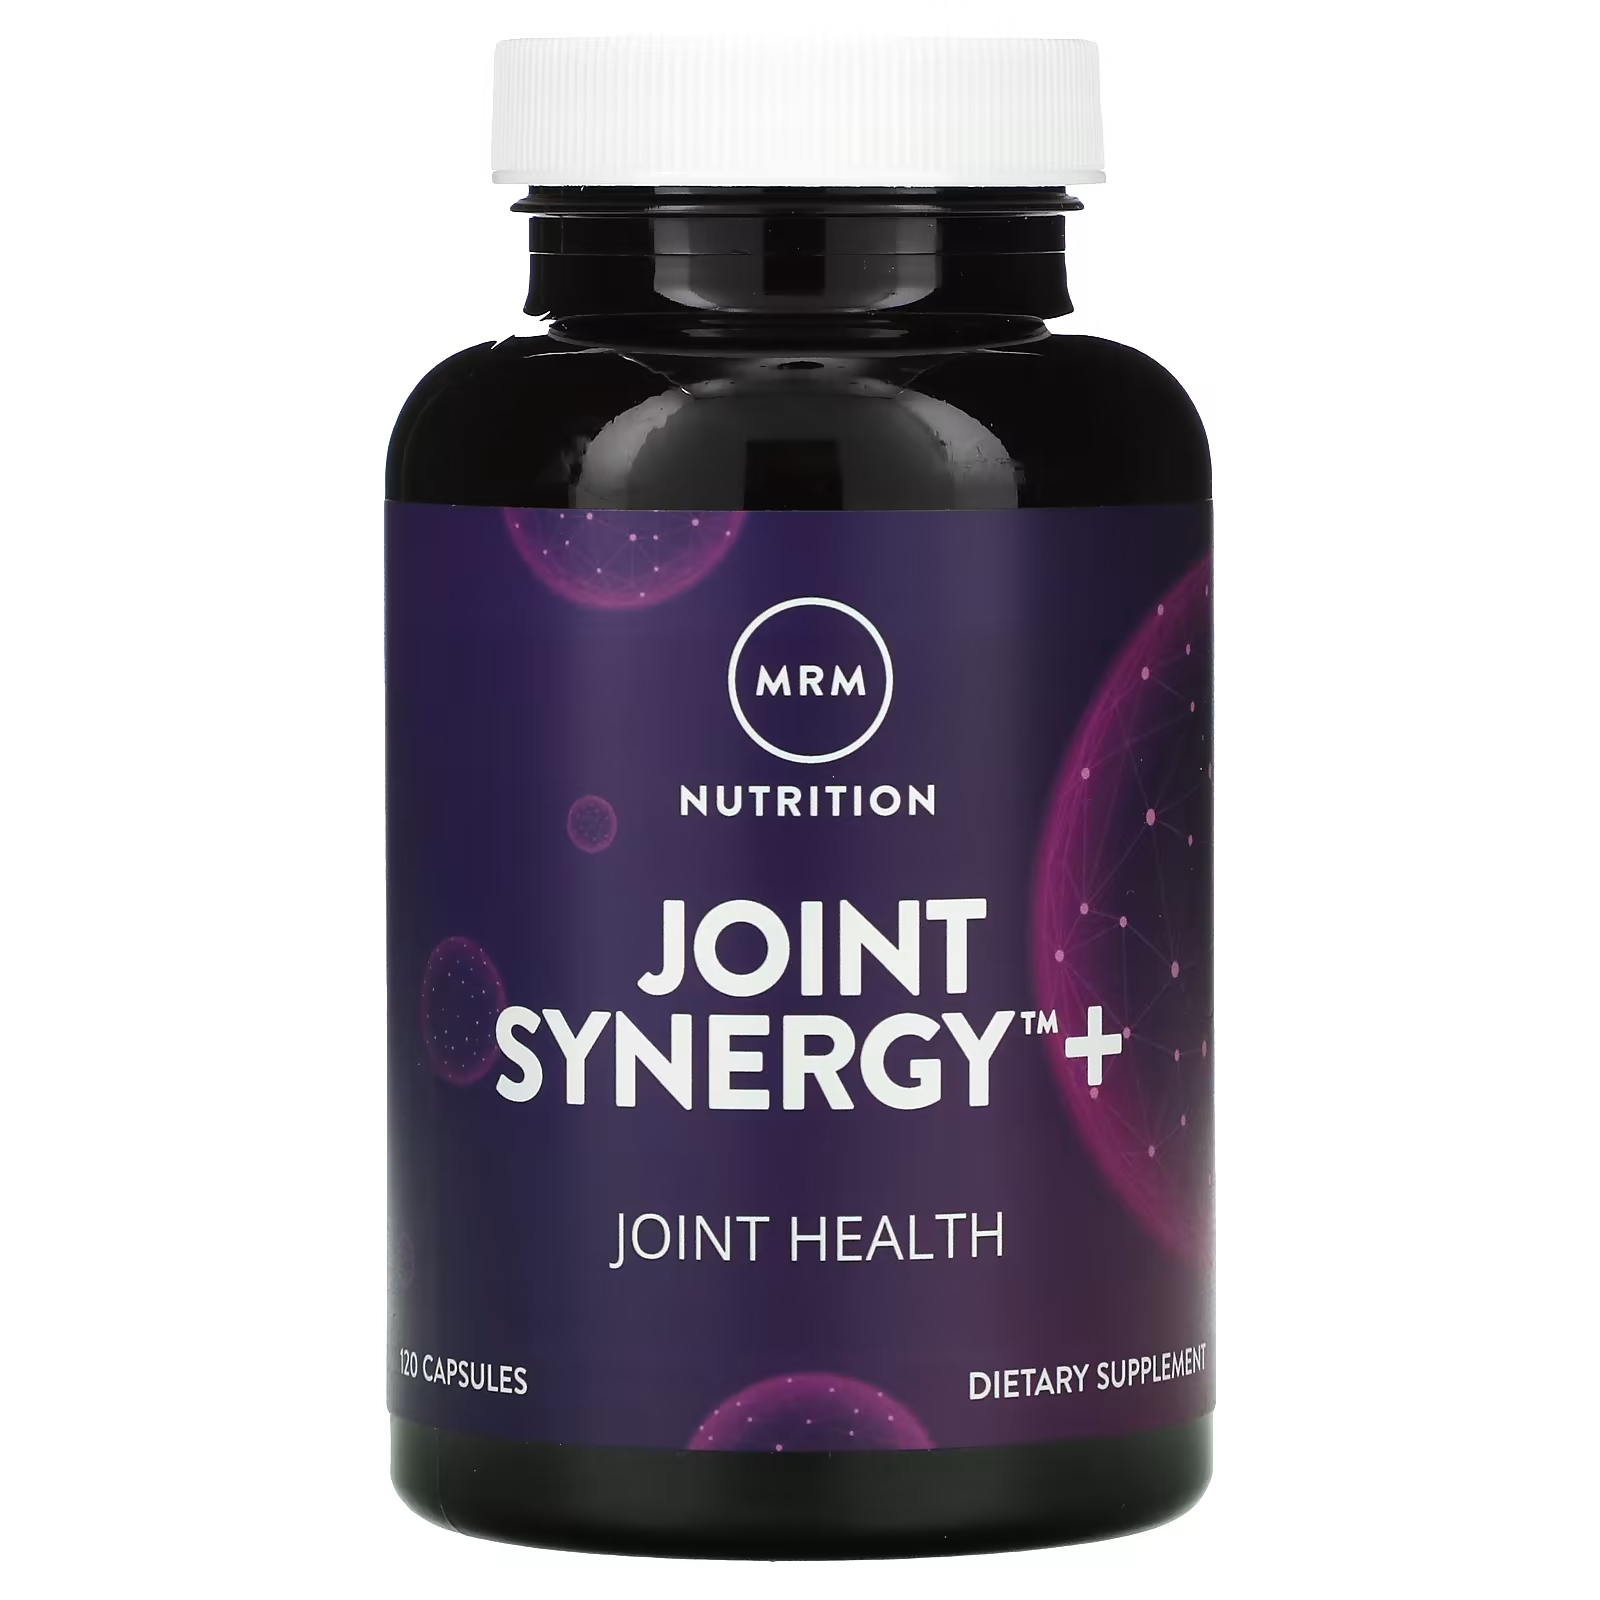 MRM Nutrition Joint Synergy +, 120 капсул williams nutrition joint advantage gold 5x 120 таблеток